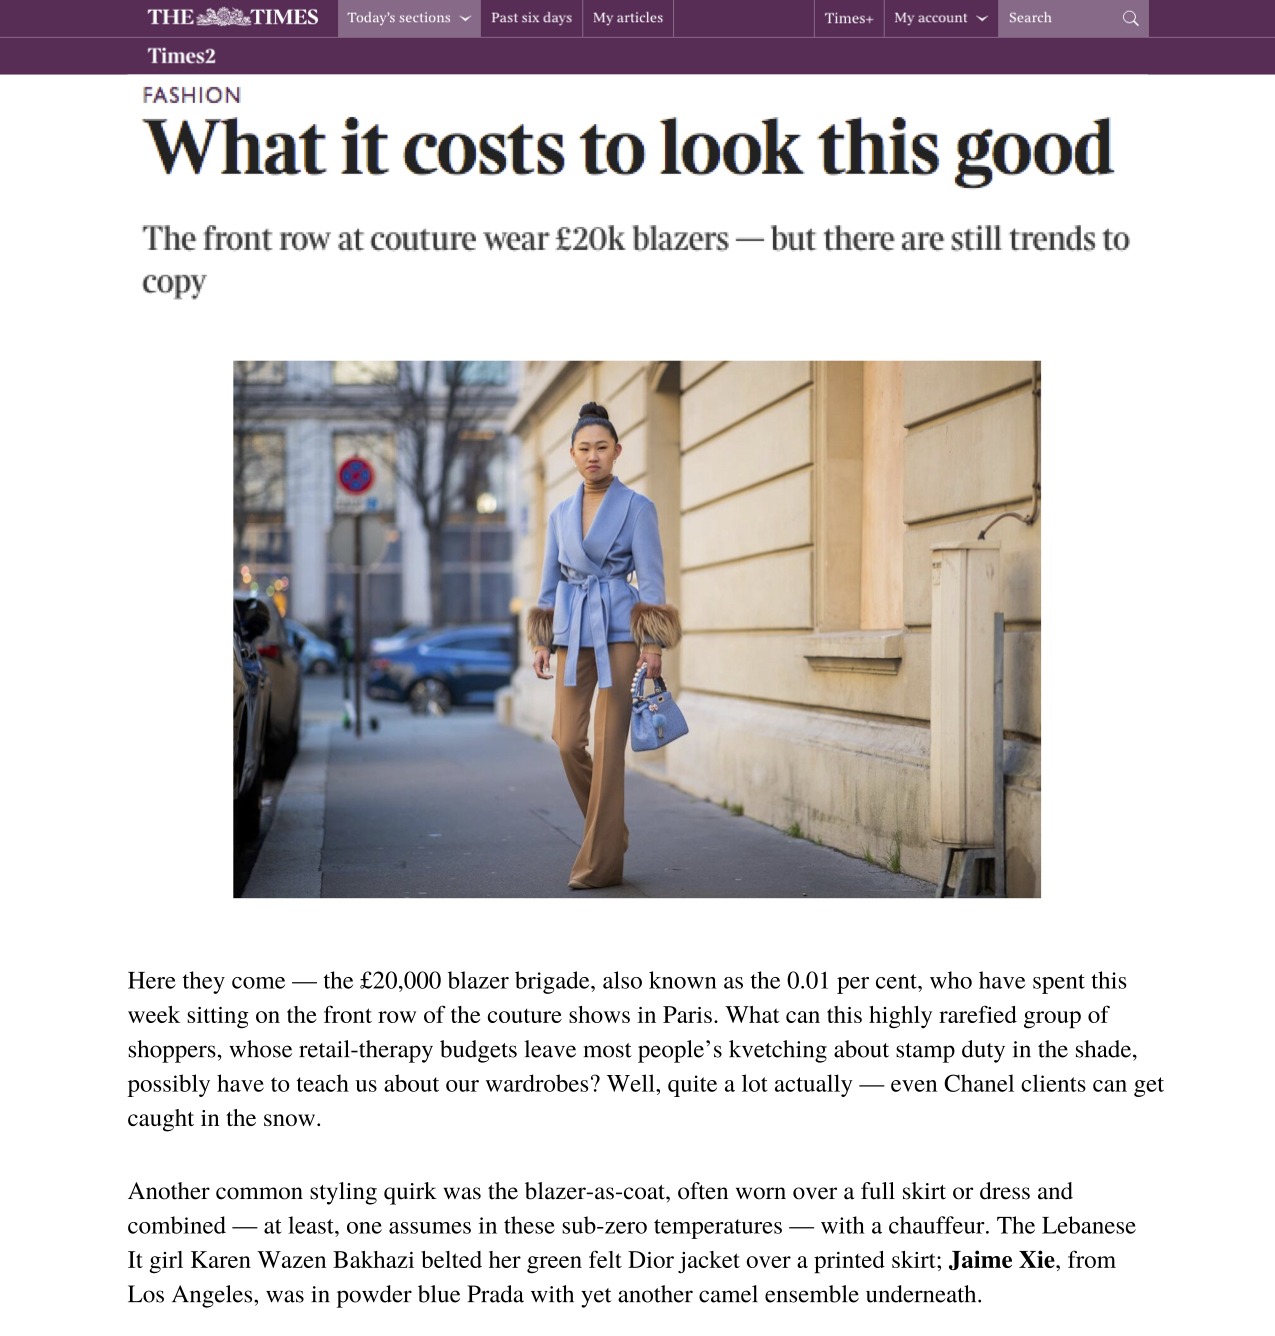 The Times: What It Costs to Look This Good